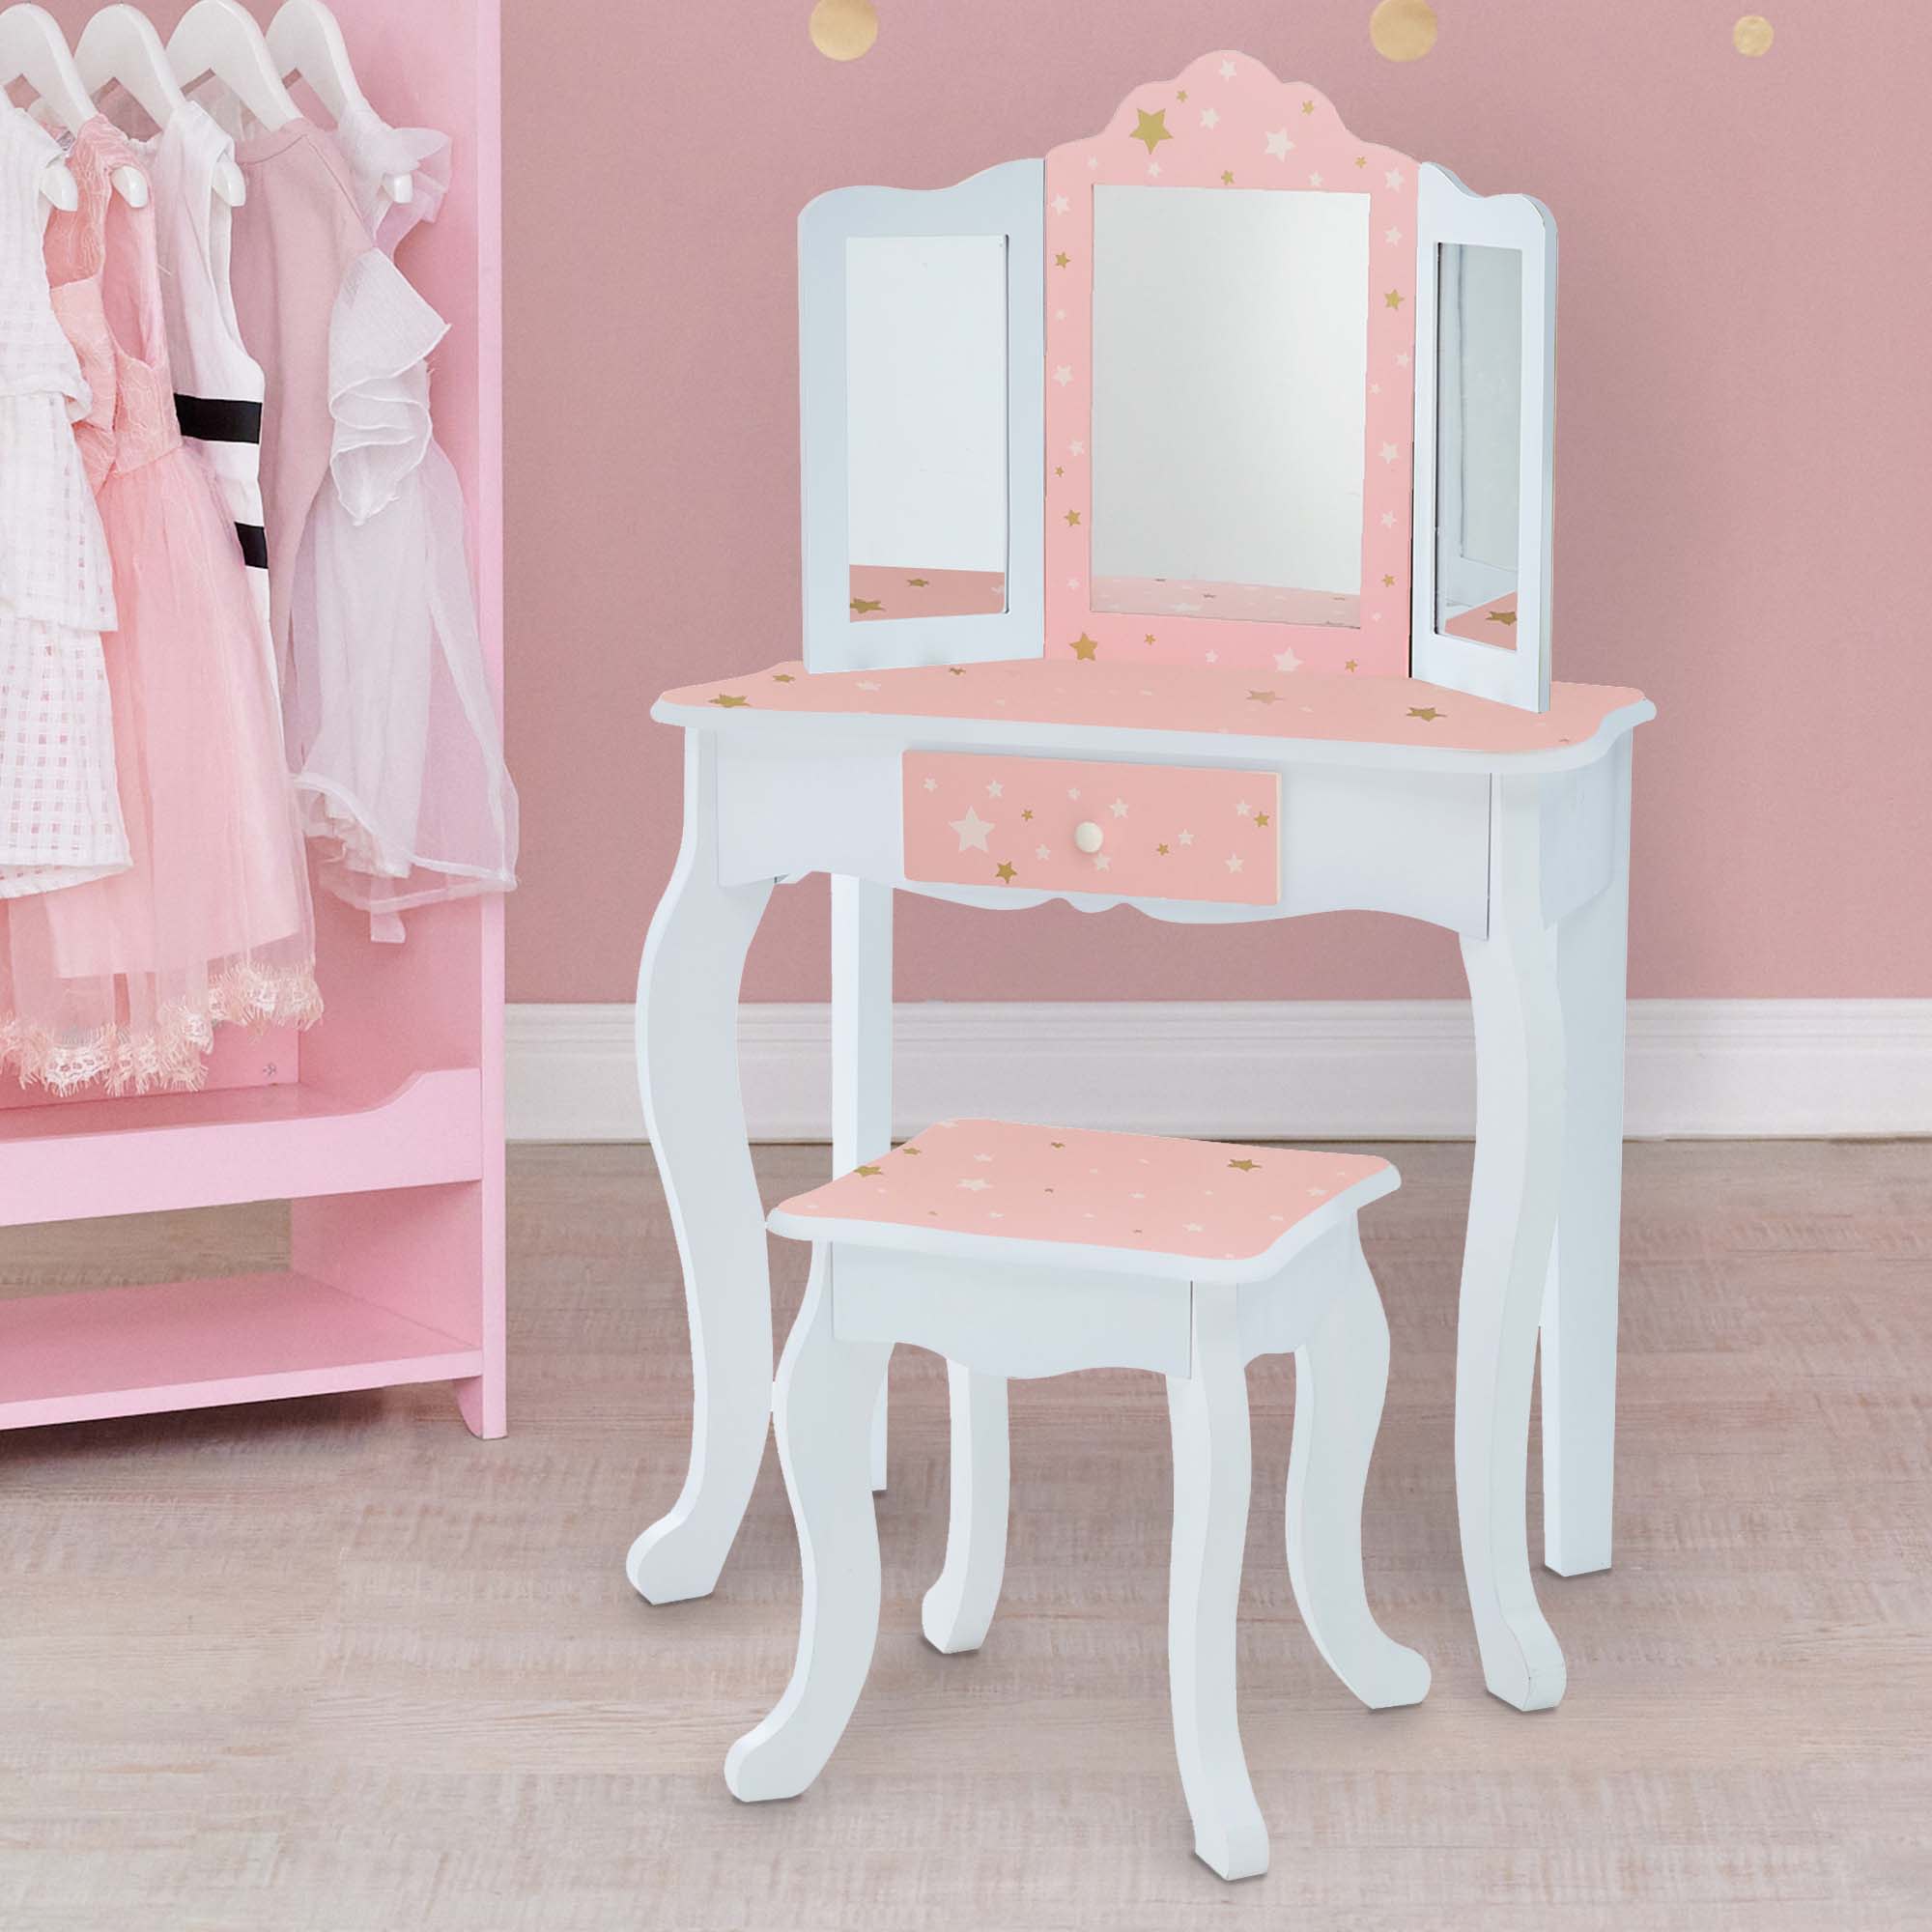 Fantasy Fields Gisele Play Vanity Set with Mirrors, Pink/White